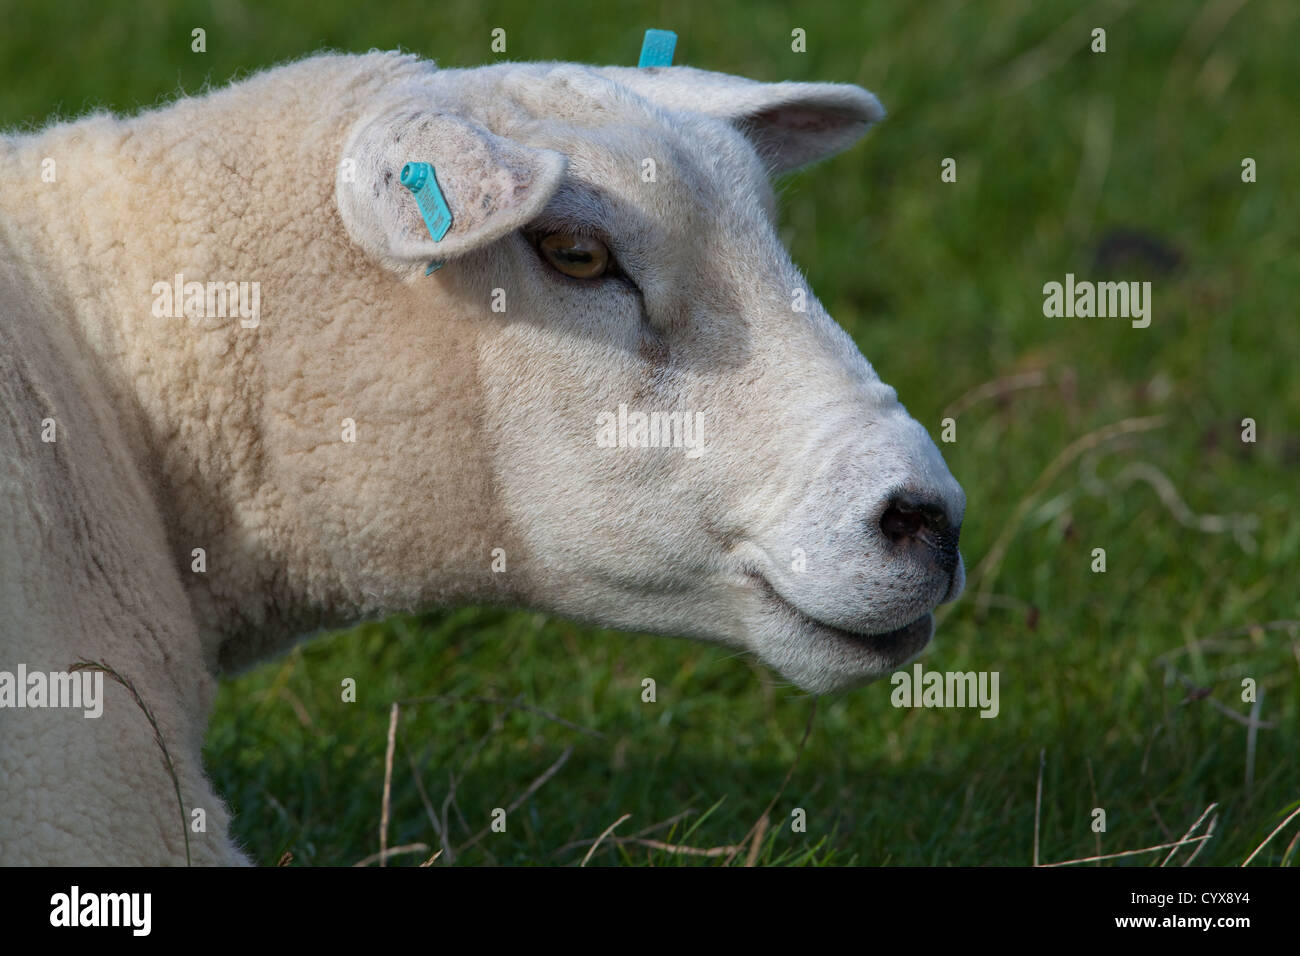 Texel Sheep (Ovis aries). Looking right. Introduced breed from The Netherlands to UK. Stock Photo